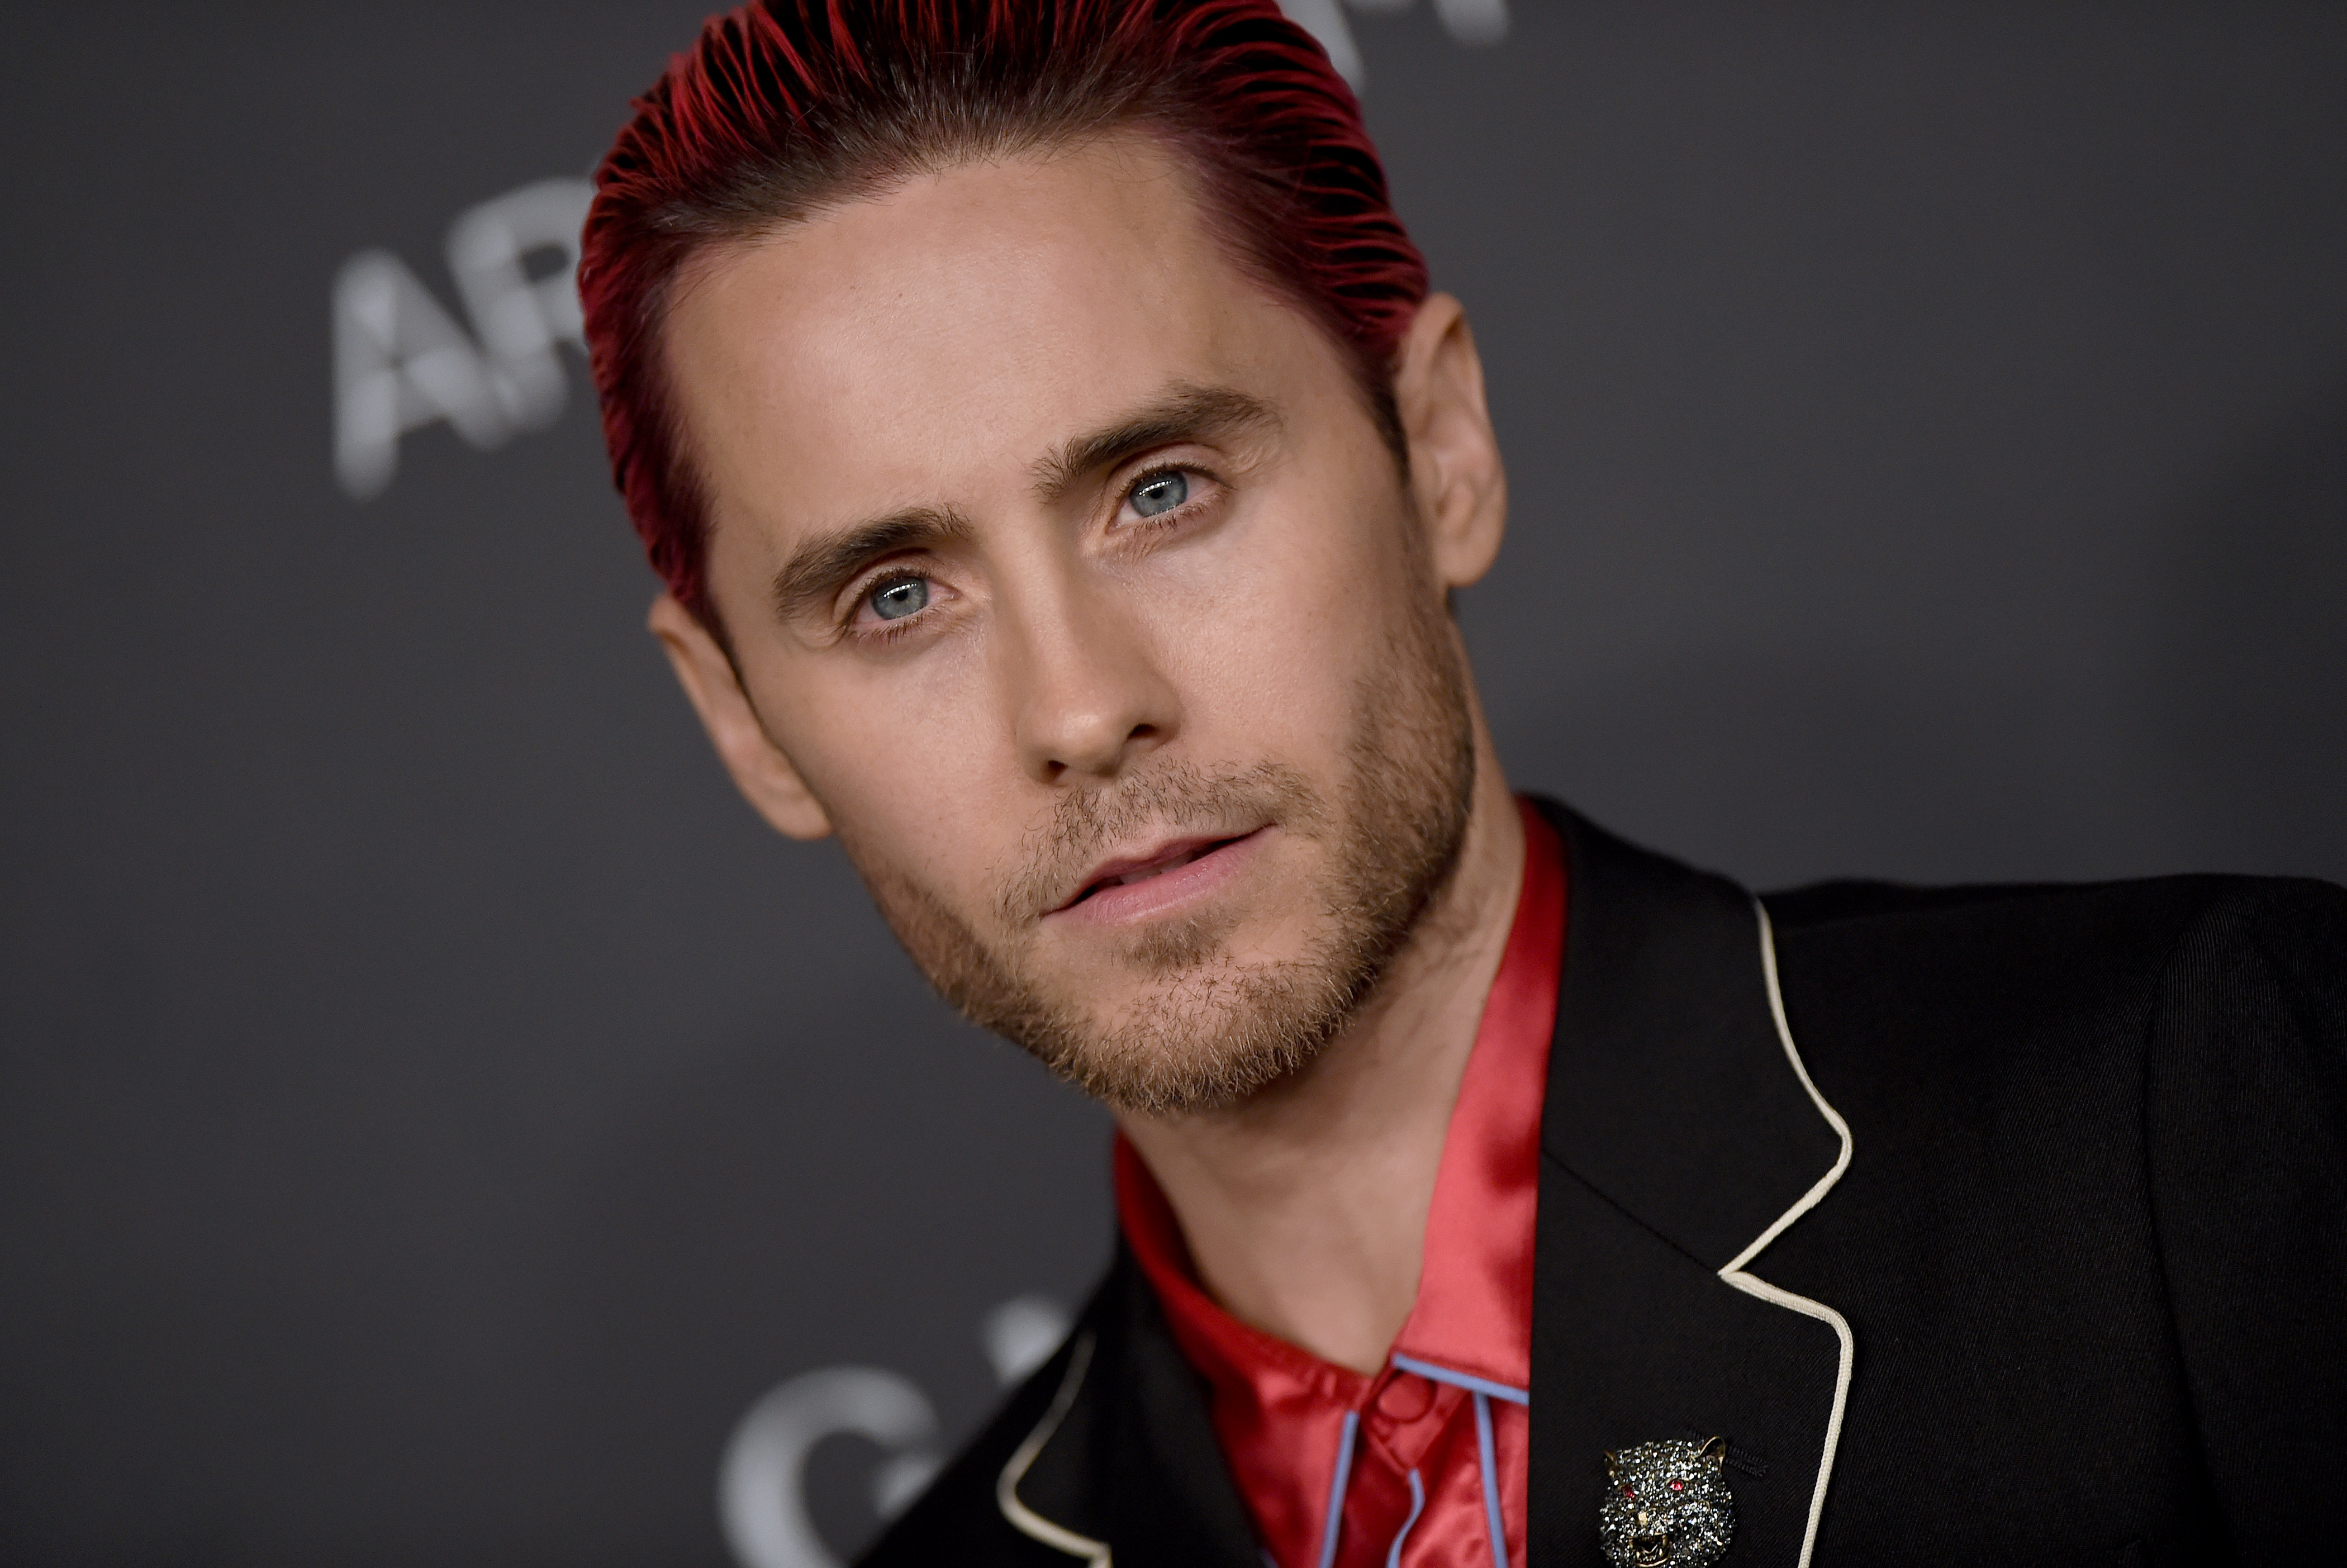 Jared Leto To Make Official Directorial Debut With '77' Film News